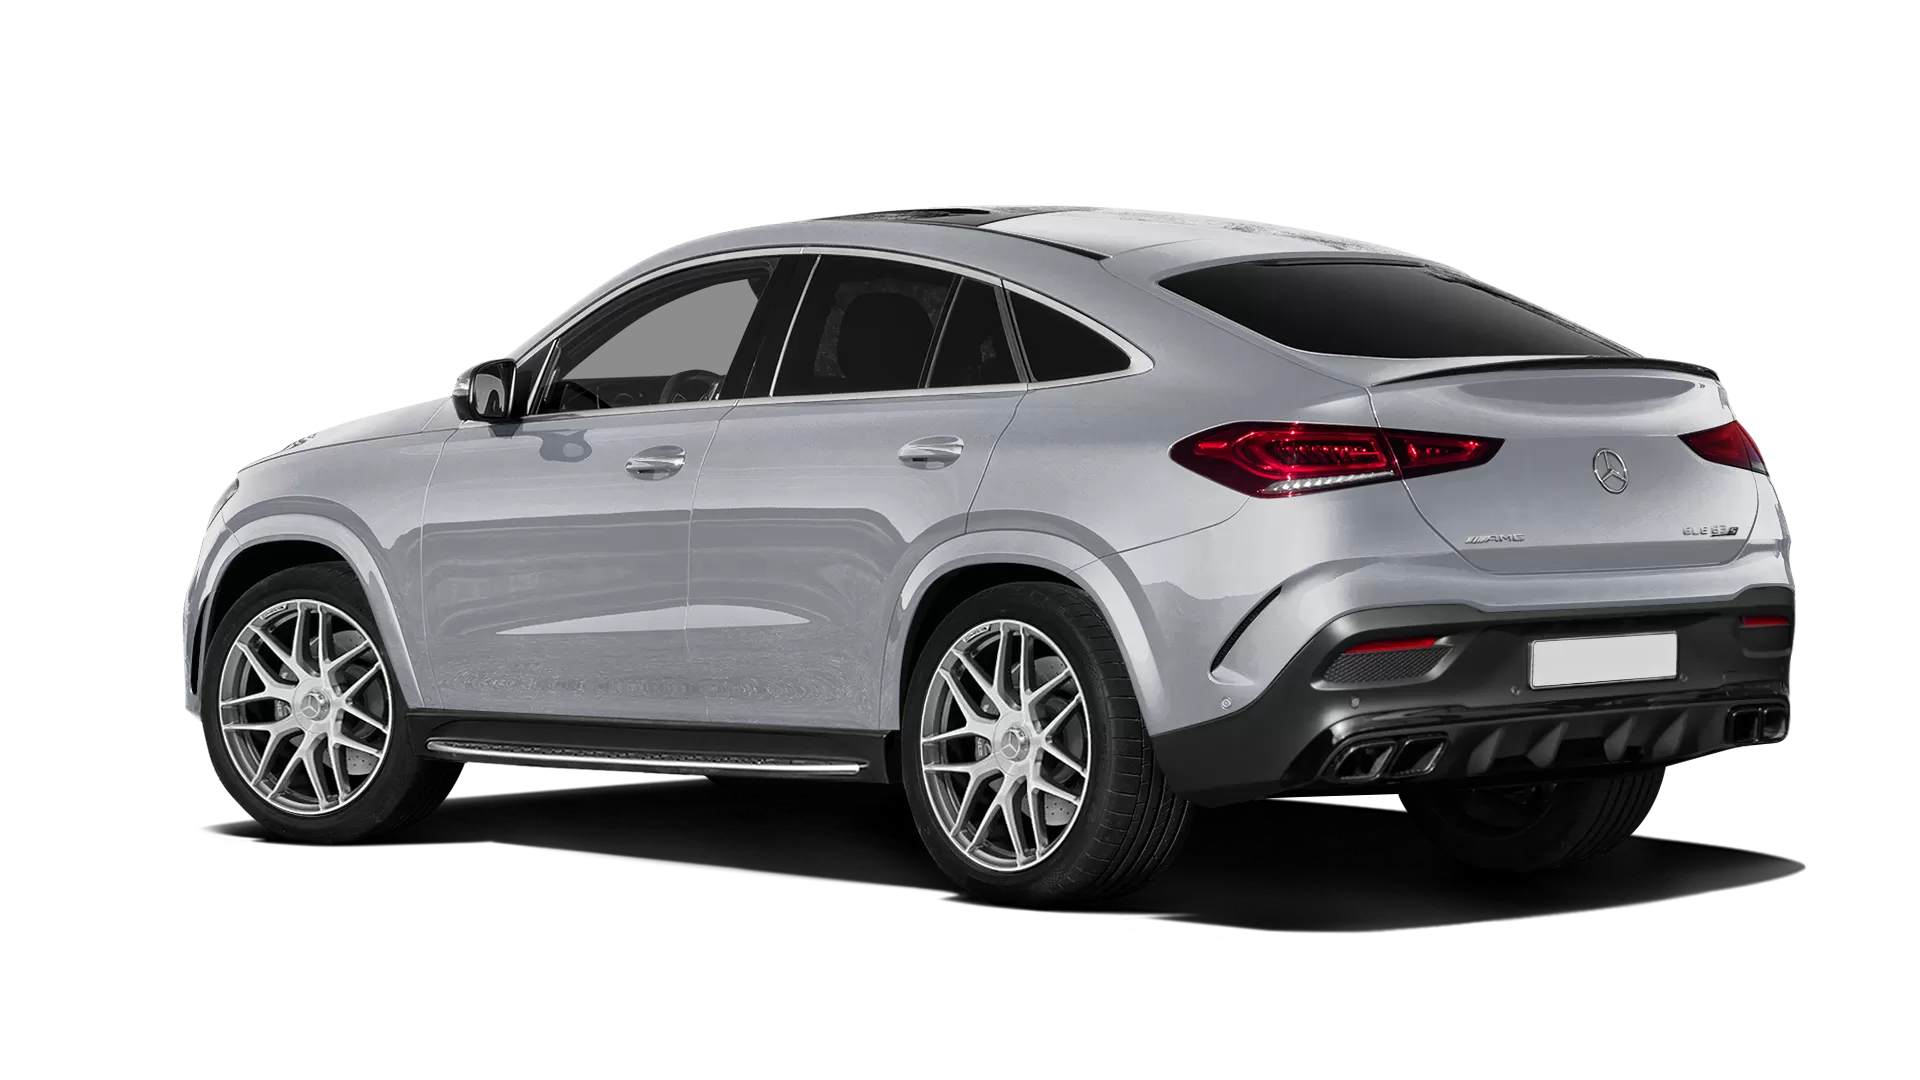 Mercedes GLE Coupe AMG 63 C167 stock rear view in High Tech Silver color